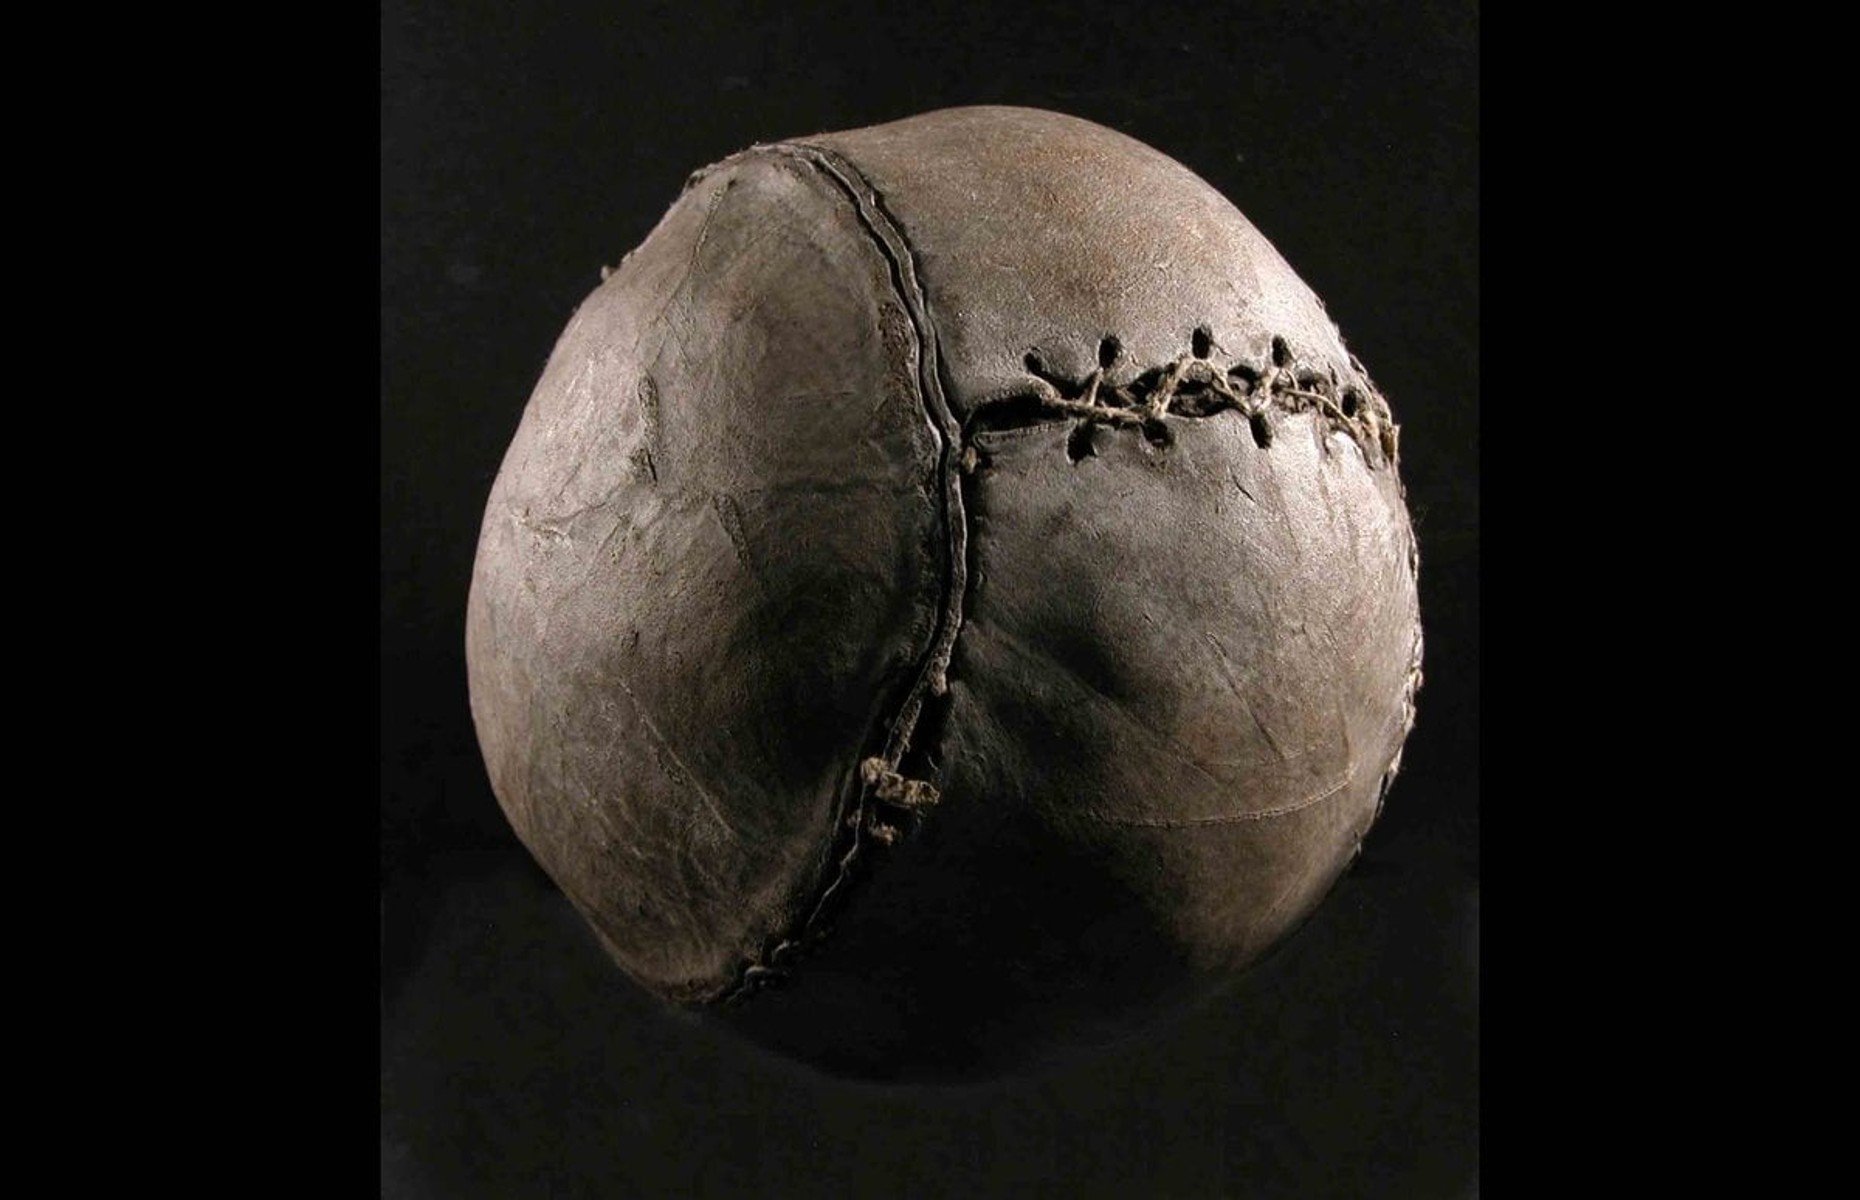 The world's oldest football displayed at The Stirling Smith Art Gallery and Museum (Image: The Stirling Smith Art Gallery and Museum/Facebook)